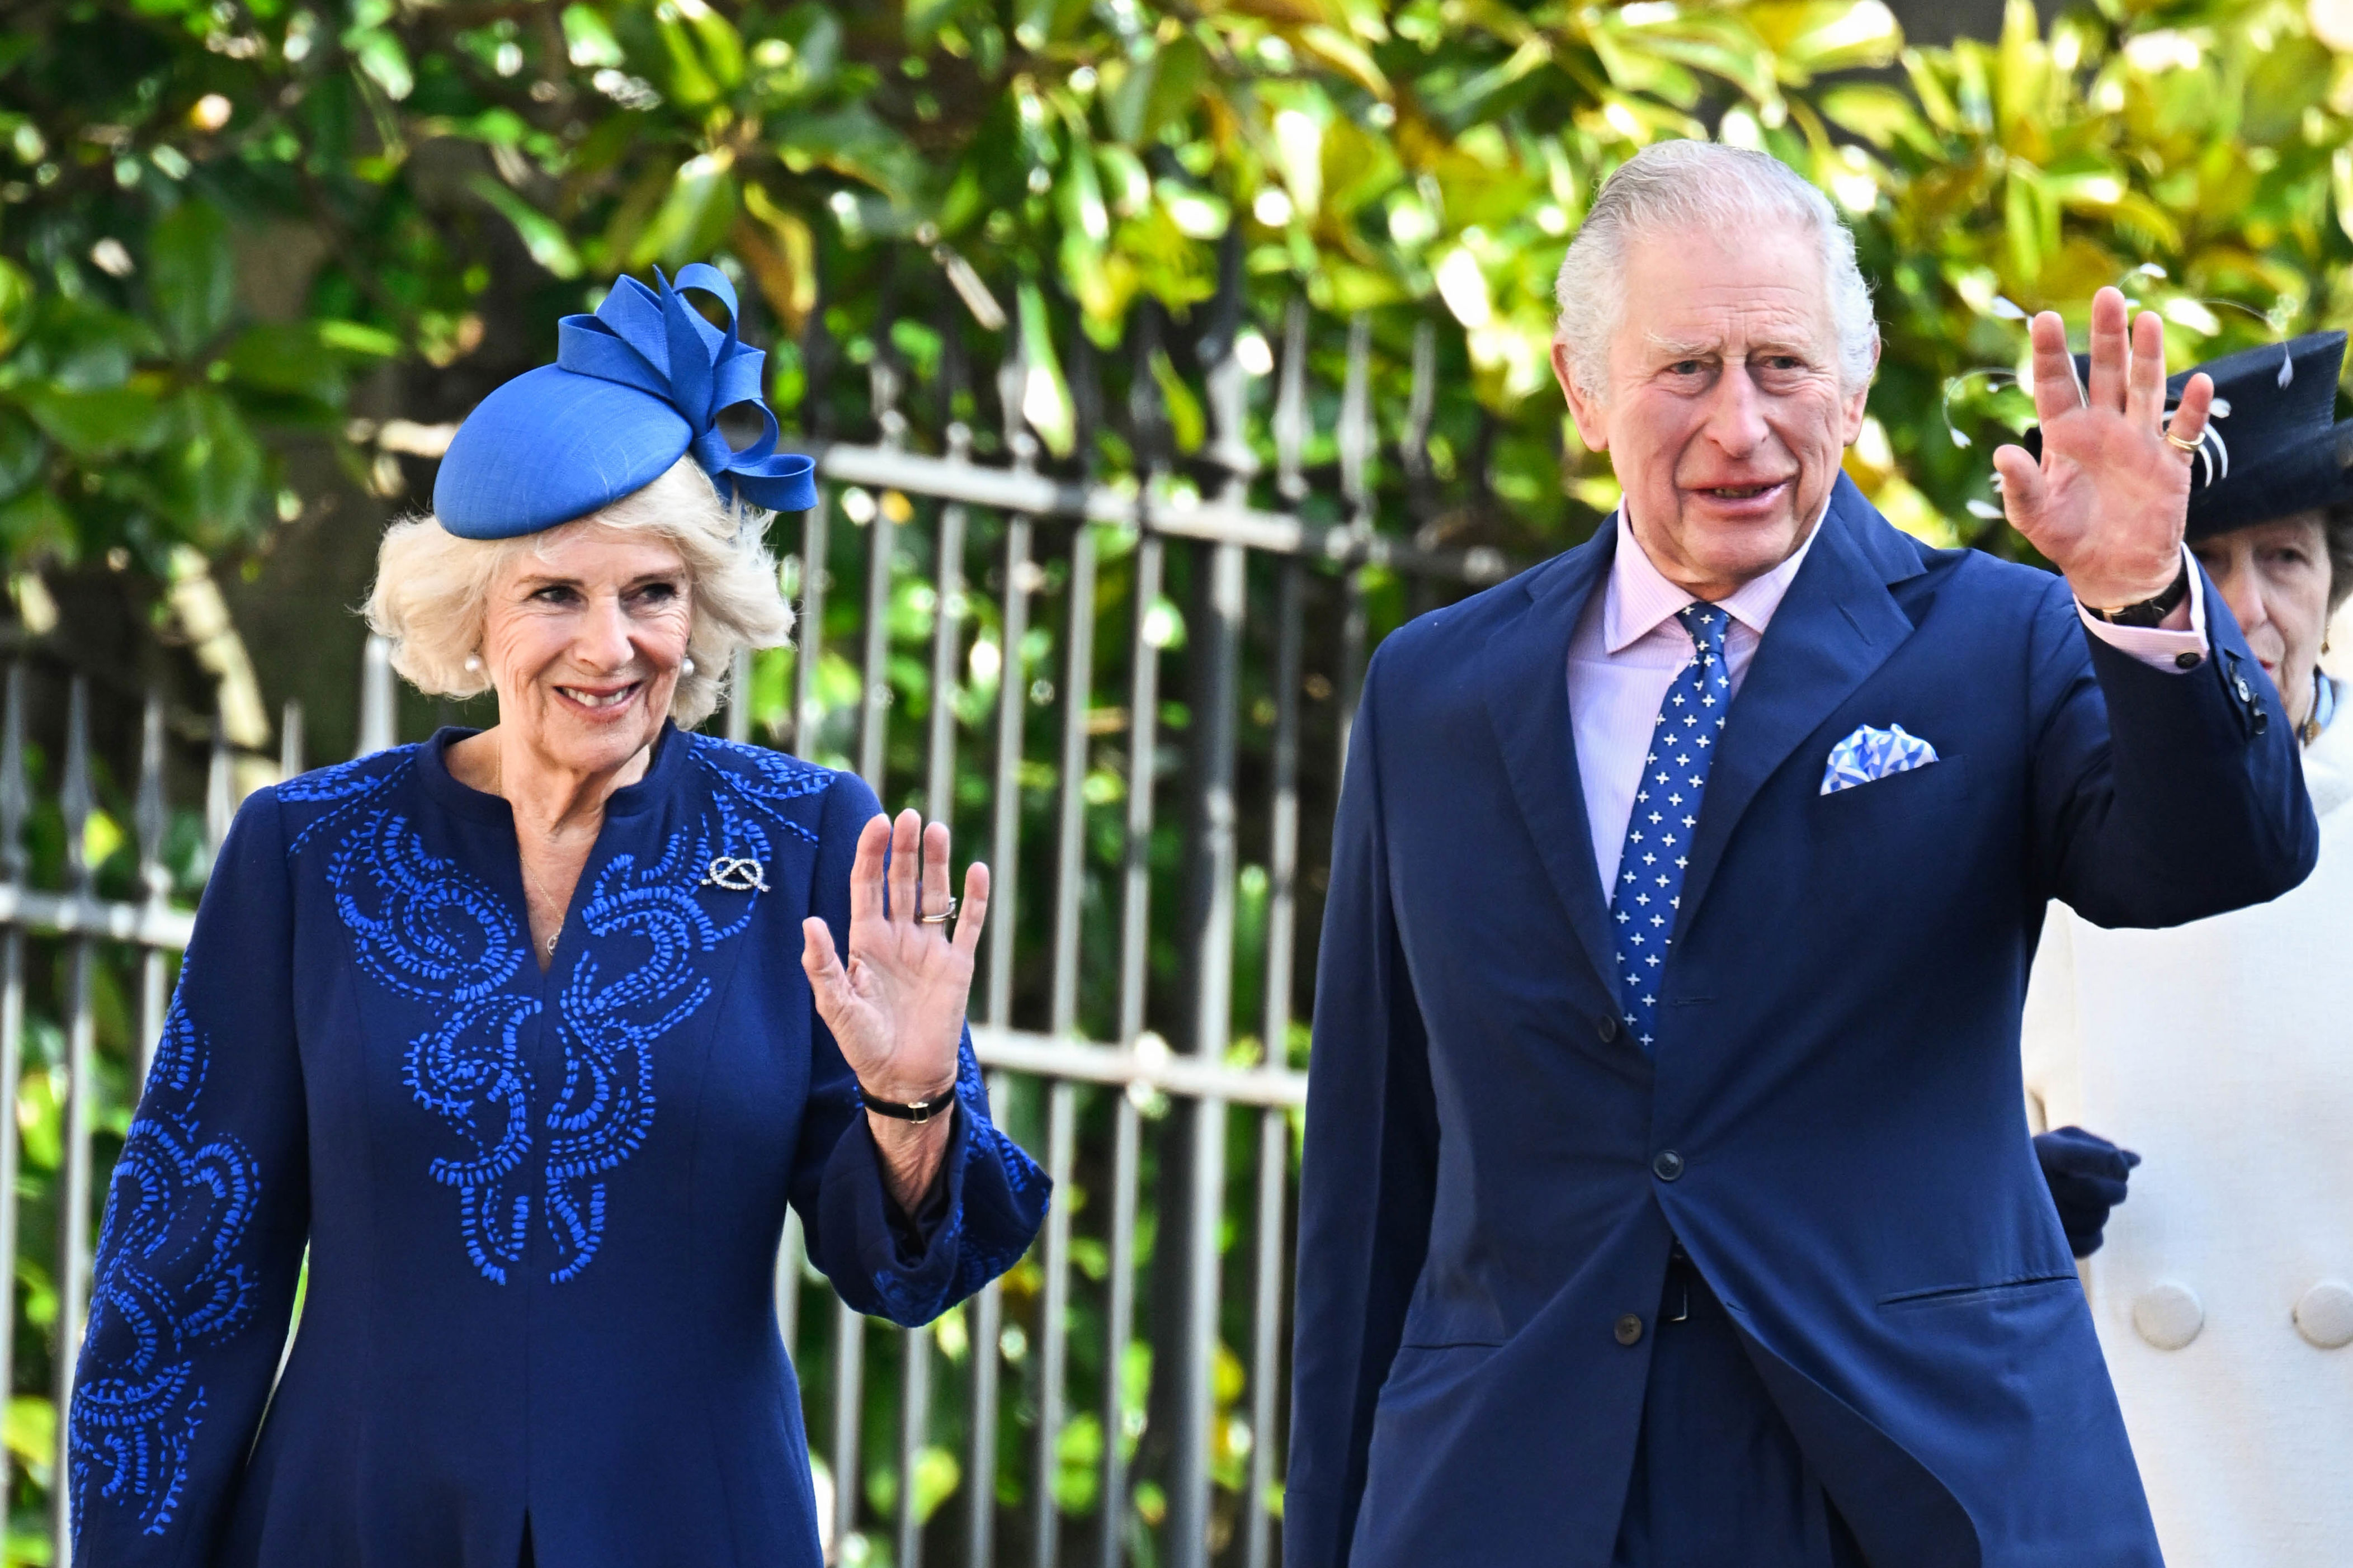 <p>Queen Consort Camilla and King Charles III, who coordinated in royal blue ensembles, waved on their way to the Easter Mattins Service at St. George's Chapel at Windsor Castle in England on April 9, 2023.</p>